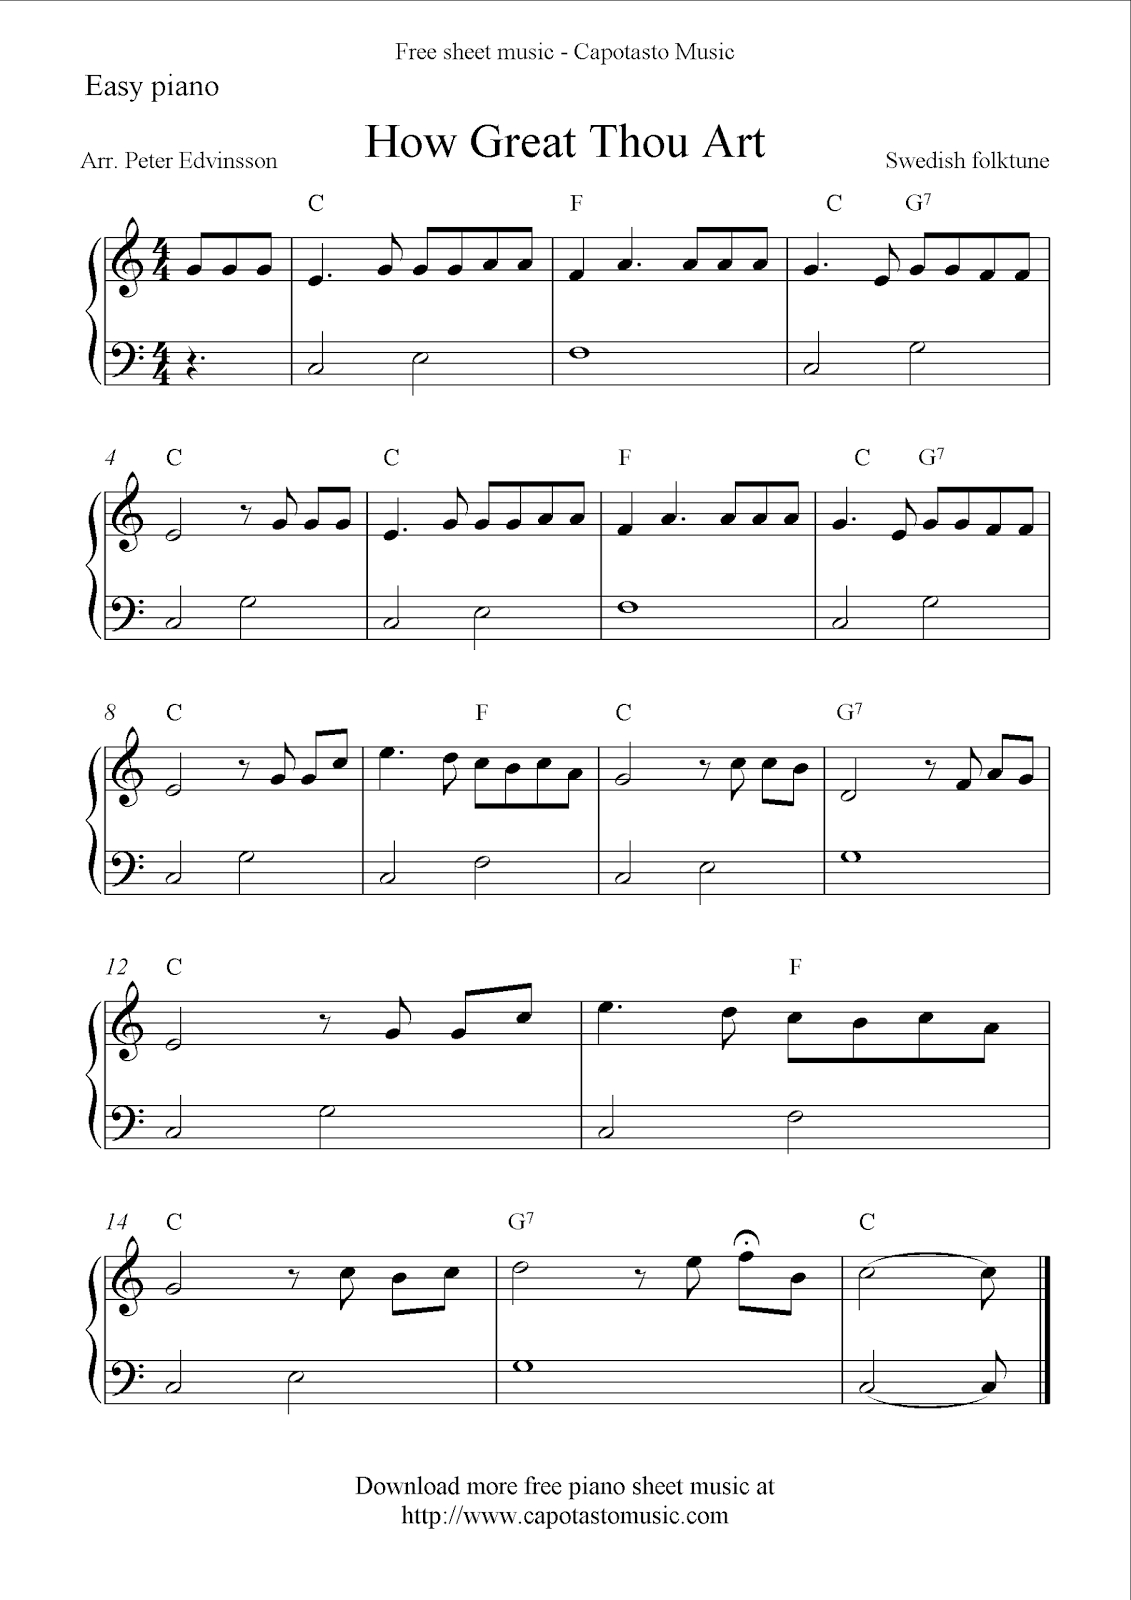 Free Sheet Music Scores: Free Easy Piano Sheet Music, How Great Thou - Beginner Piano Worksheets Printable Free